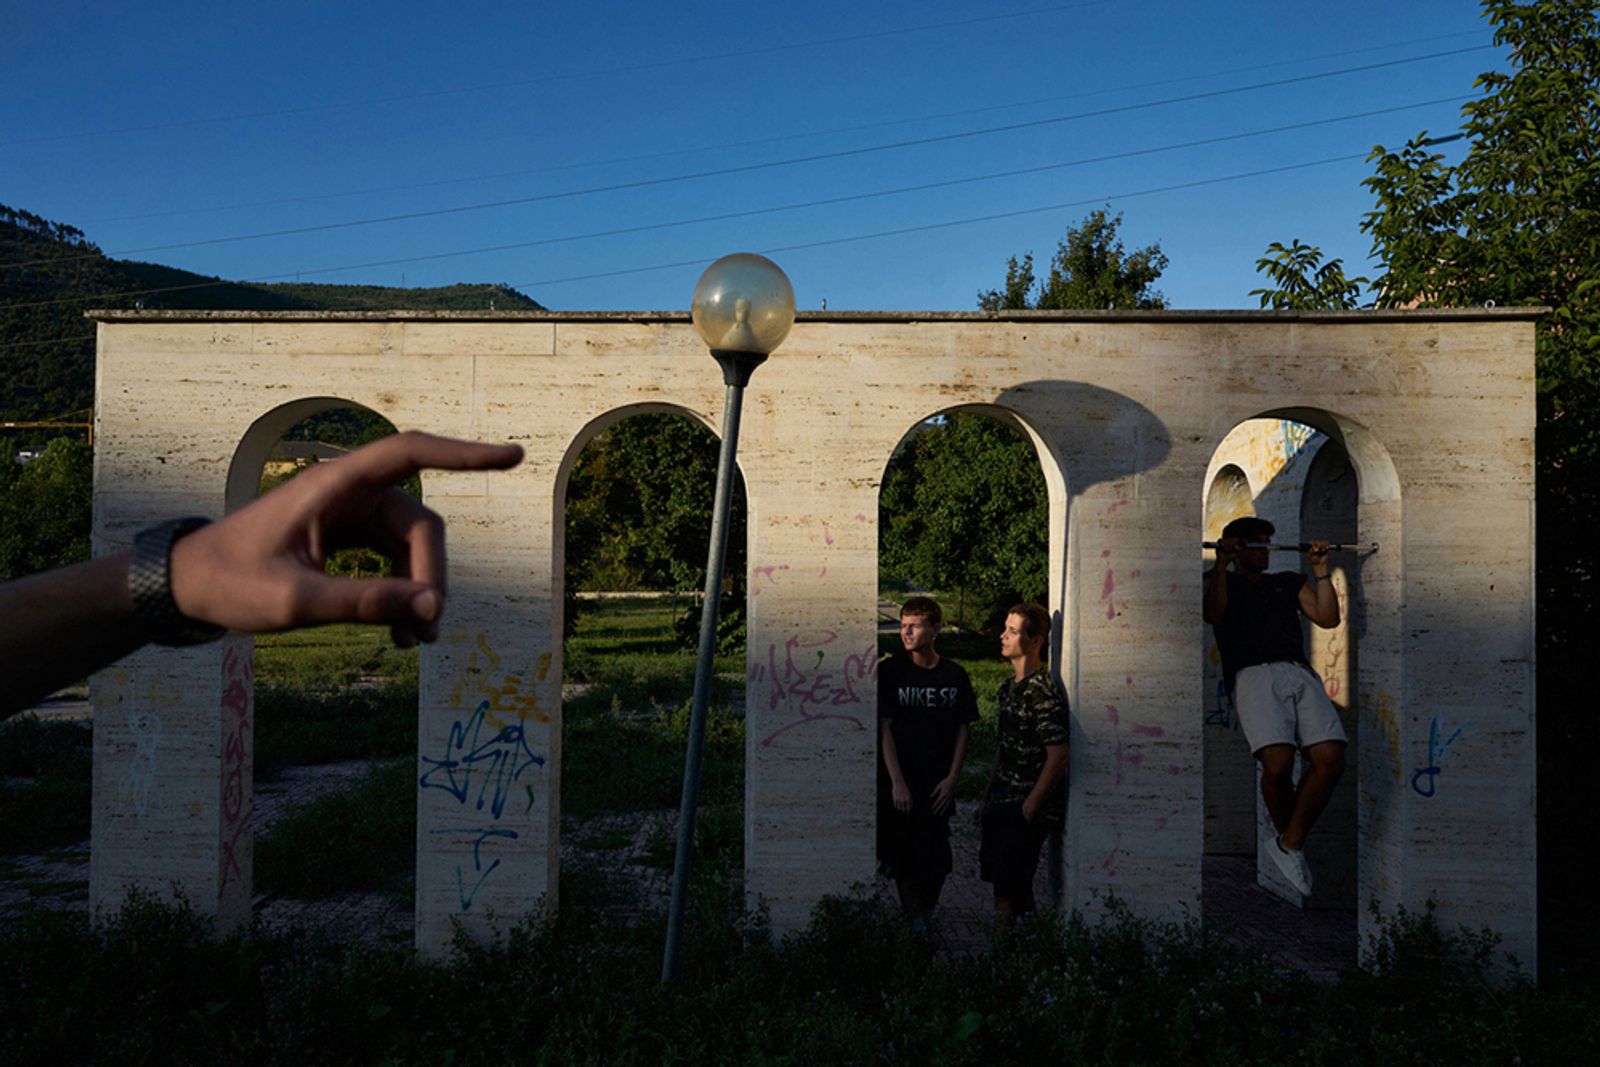 © Danilo Garcia Di Meo - a marble structure with arches in a public park on the outskirts of the city